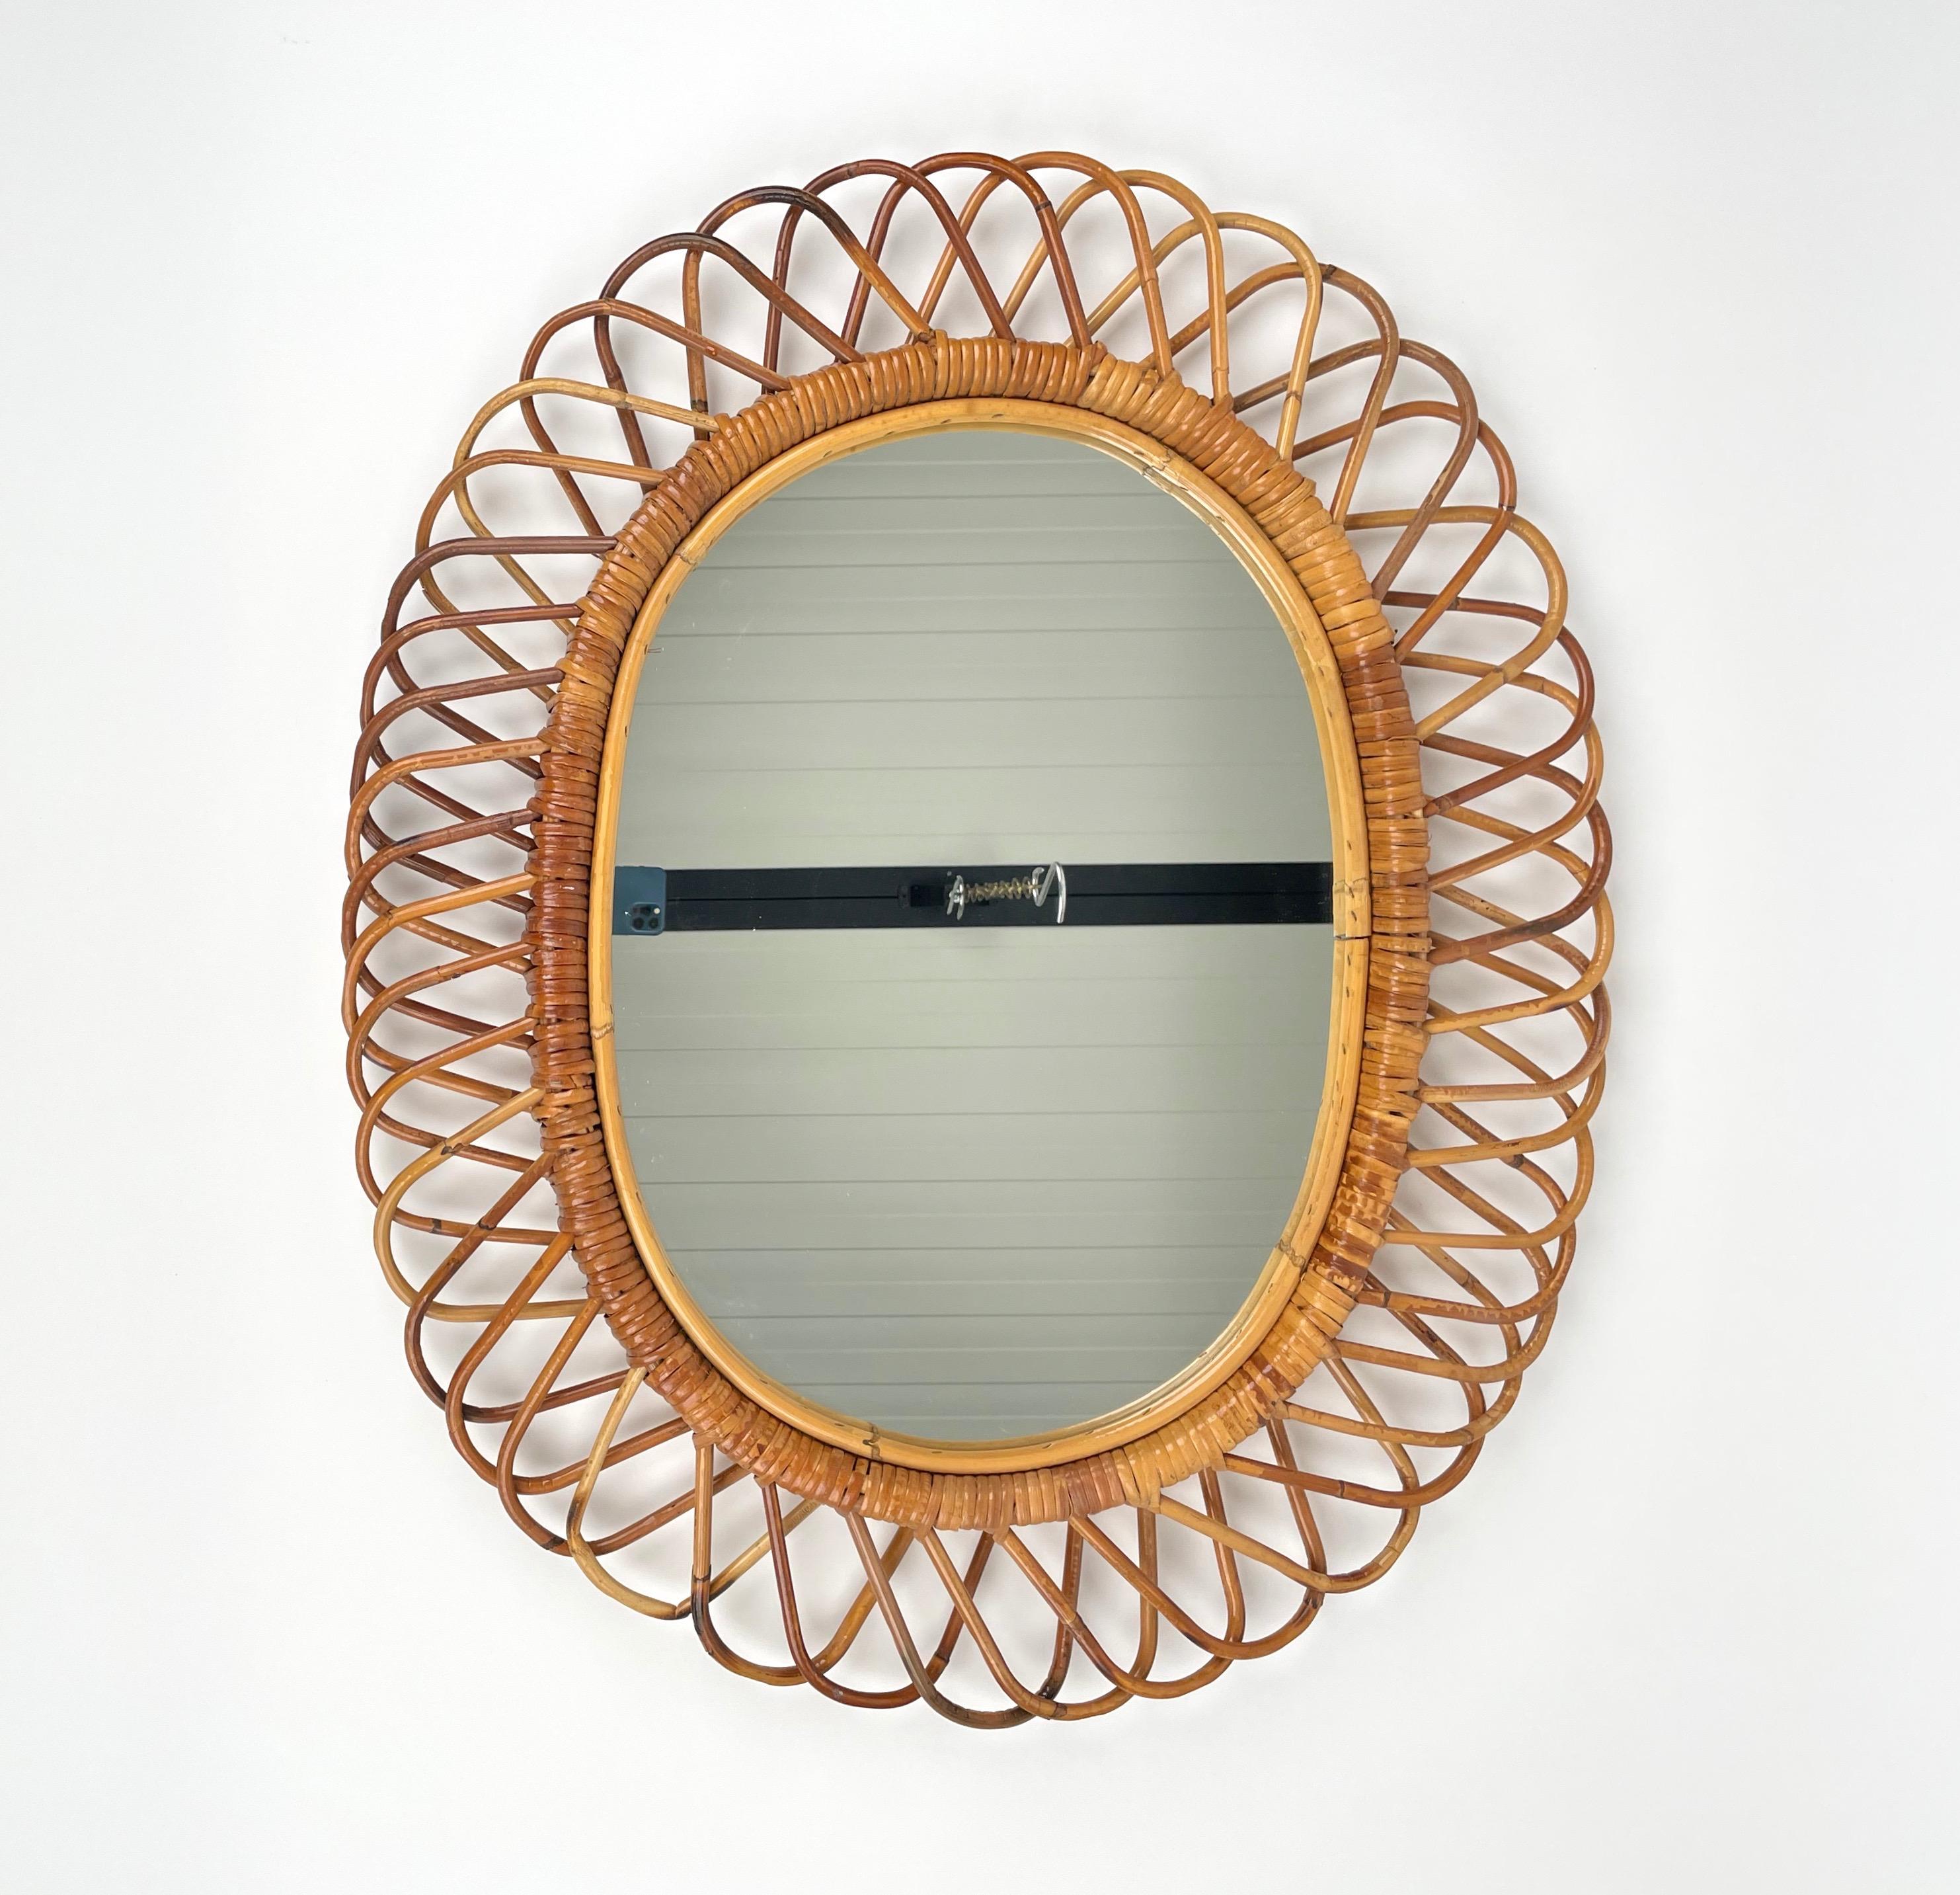 Beautiful oval wall mirror in bamboo and rattan.

Made in Italy in the 1960s.